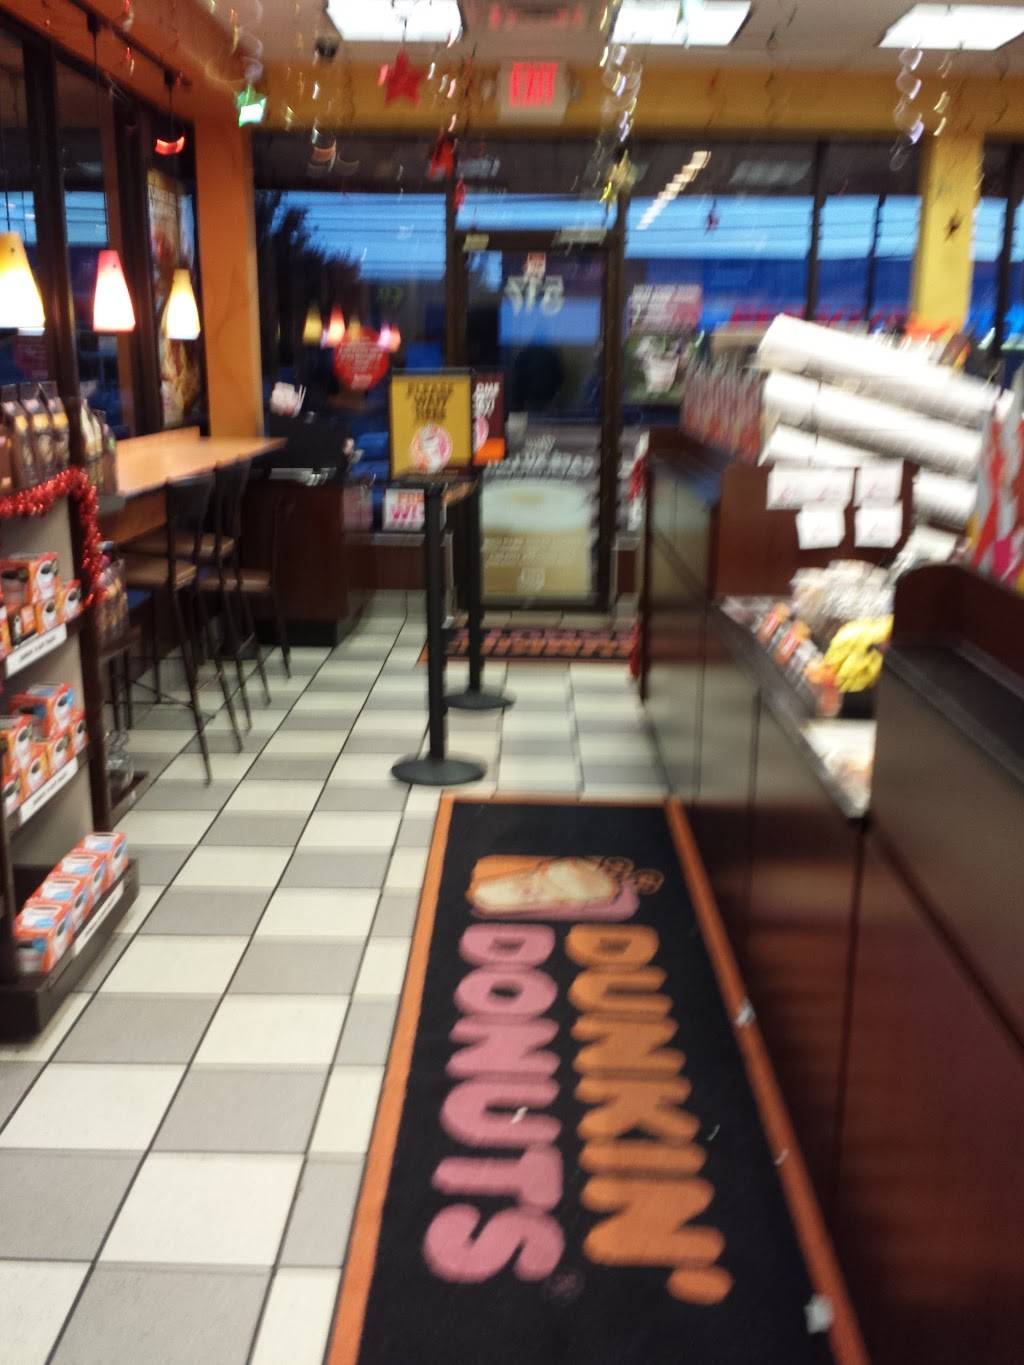 Dunkin Donuts | cafe | 517 Old Post Rd, Edison, NJ 08817, USA | 7322488025 OR +1 732-248-8025